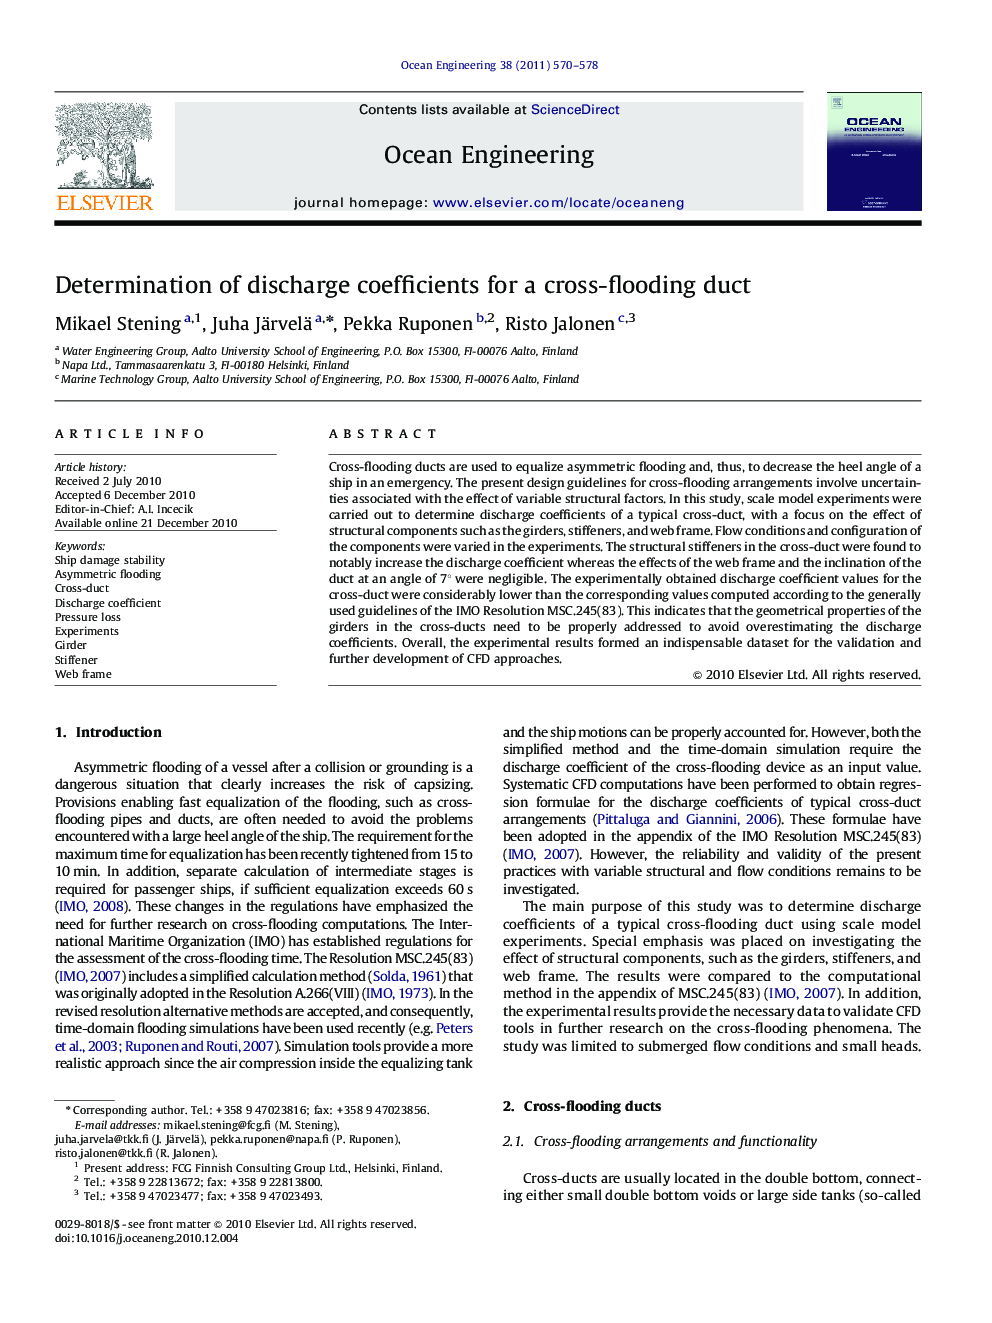 Determination of discharge coefficients for a cross-flooding duct